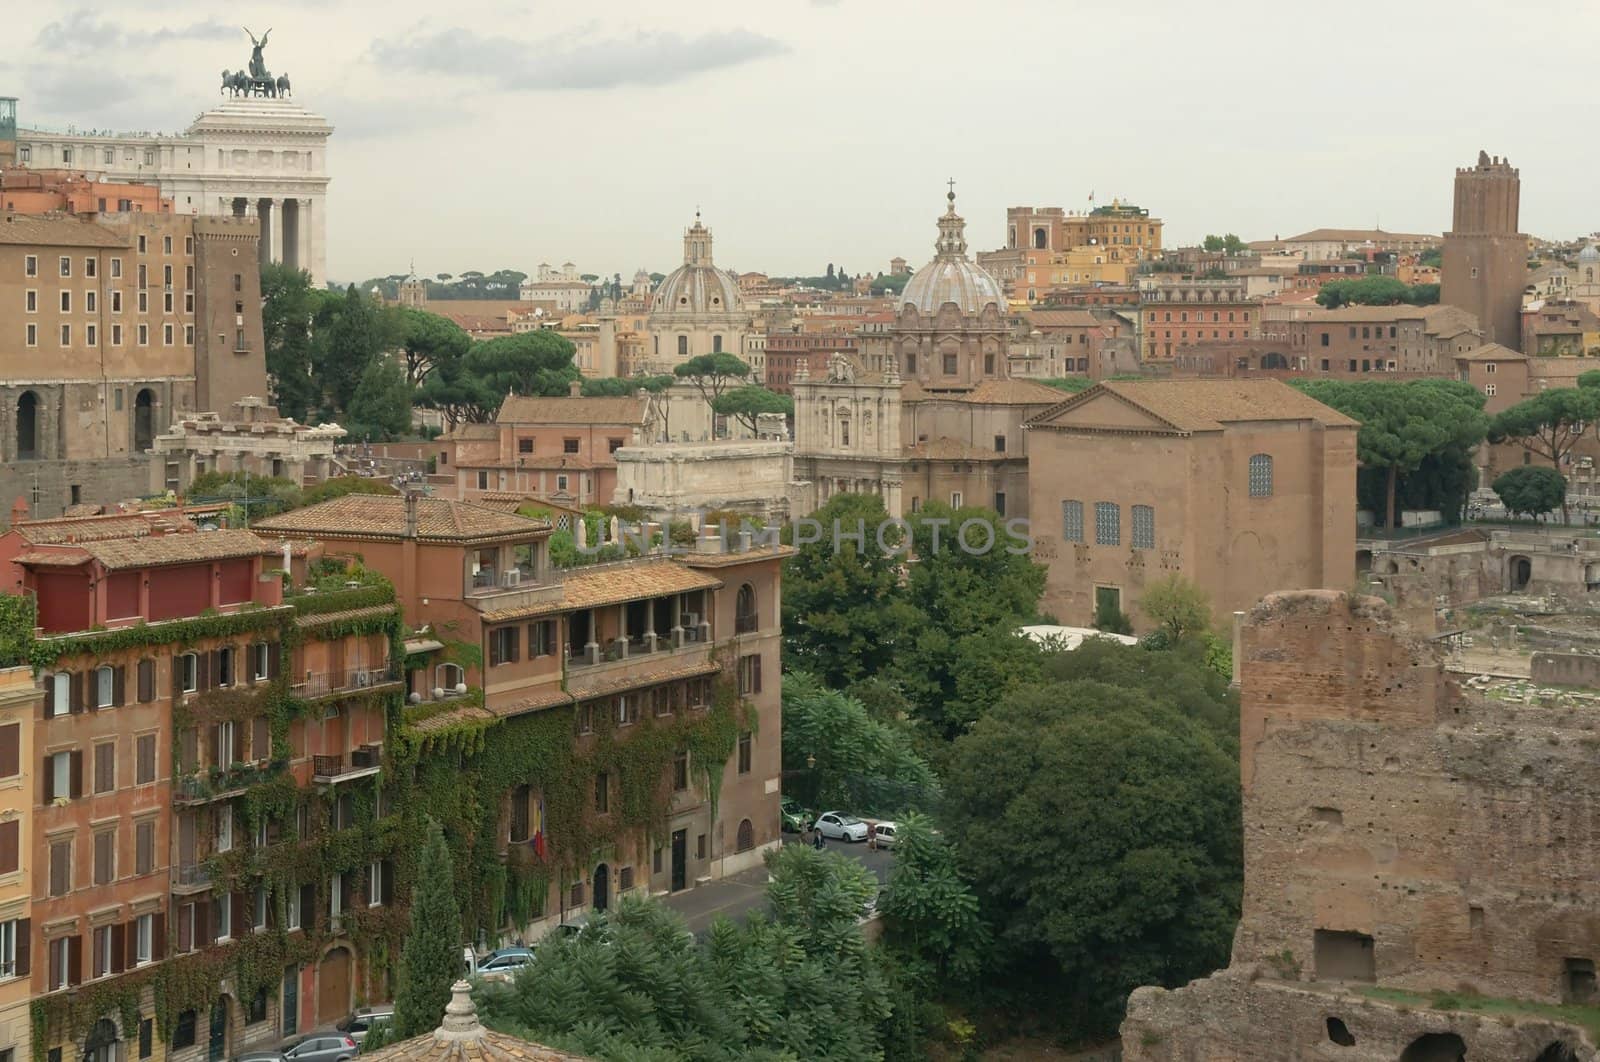 View of Rome from the hill of the Roman Forum